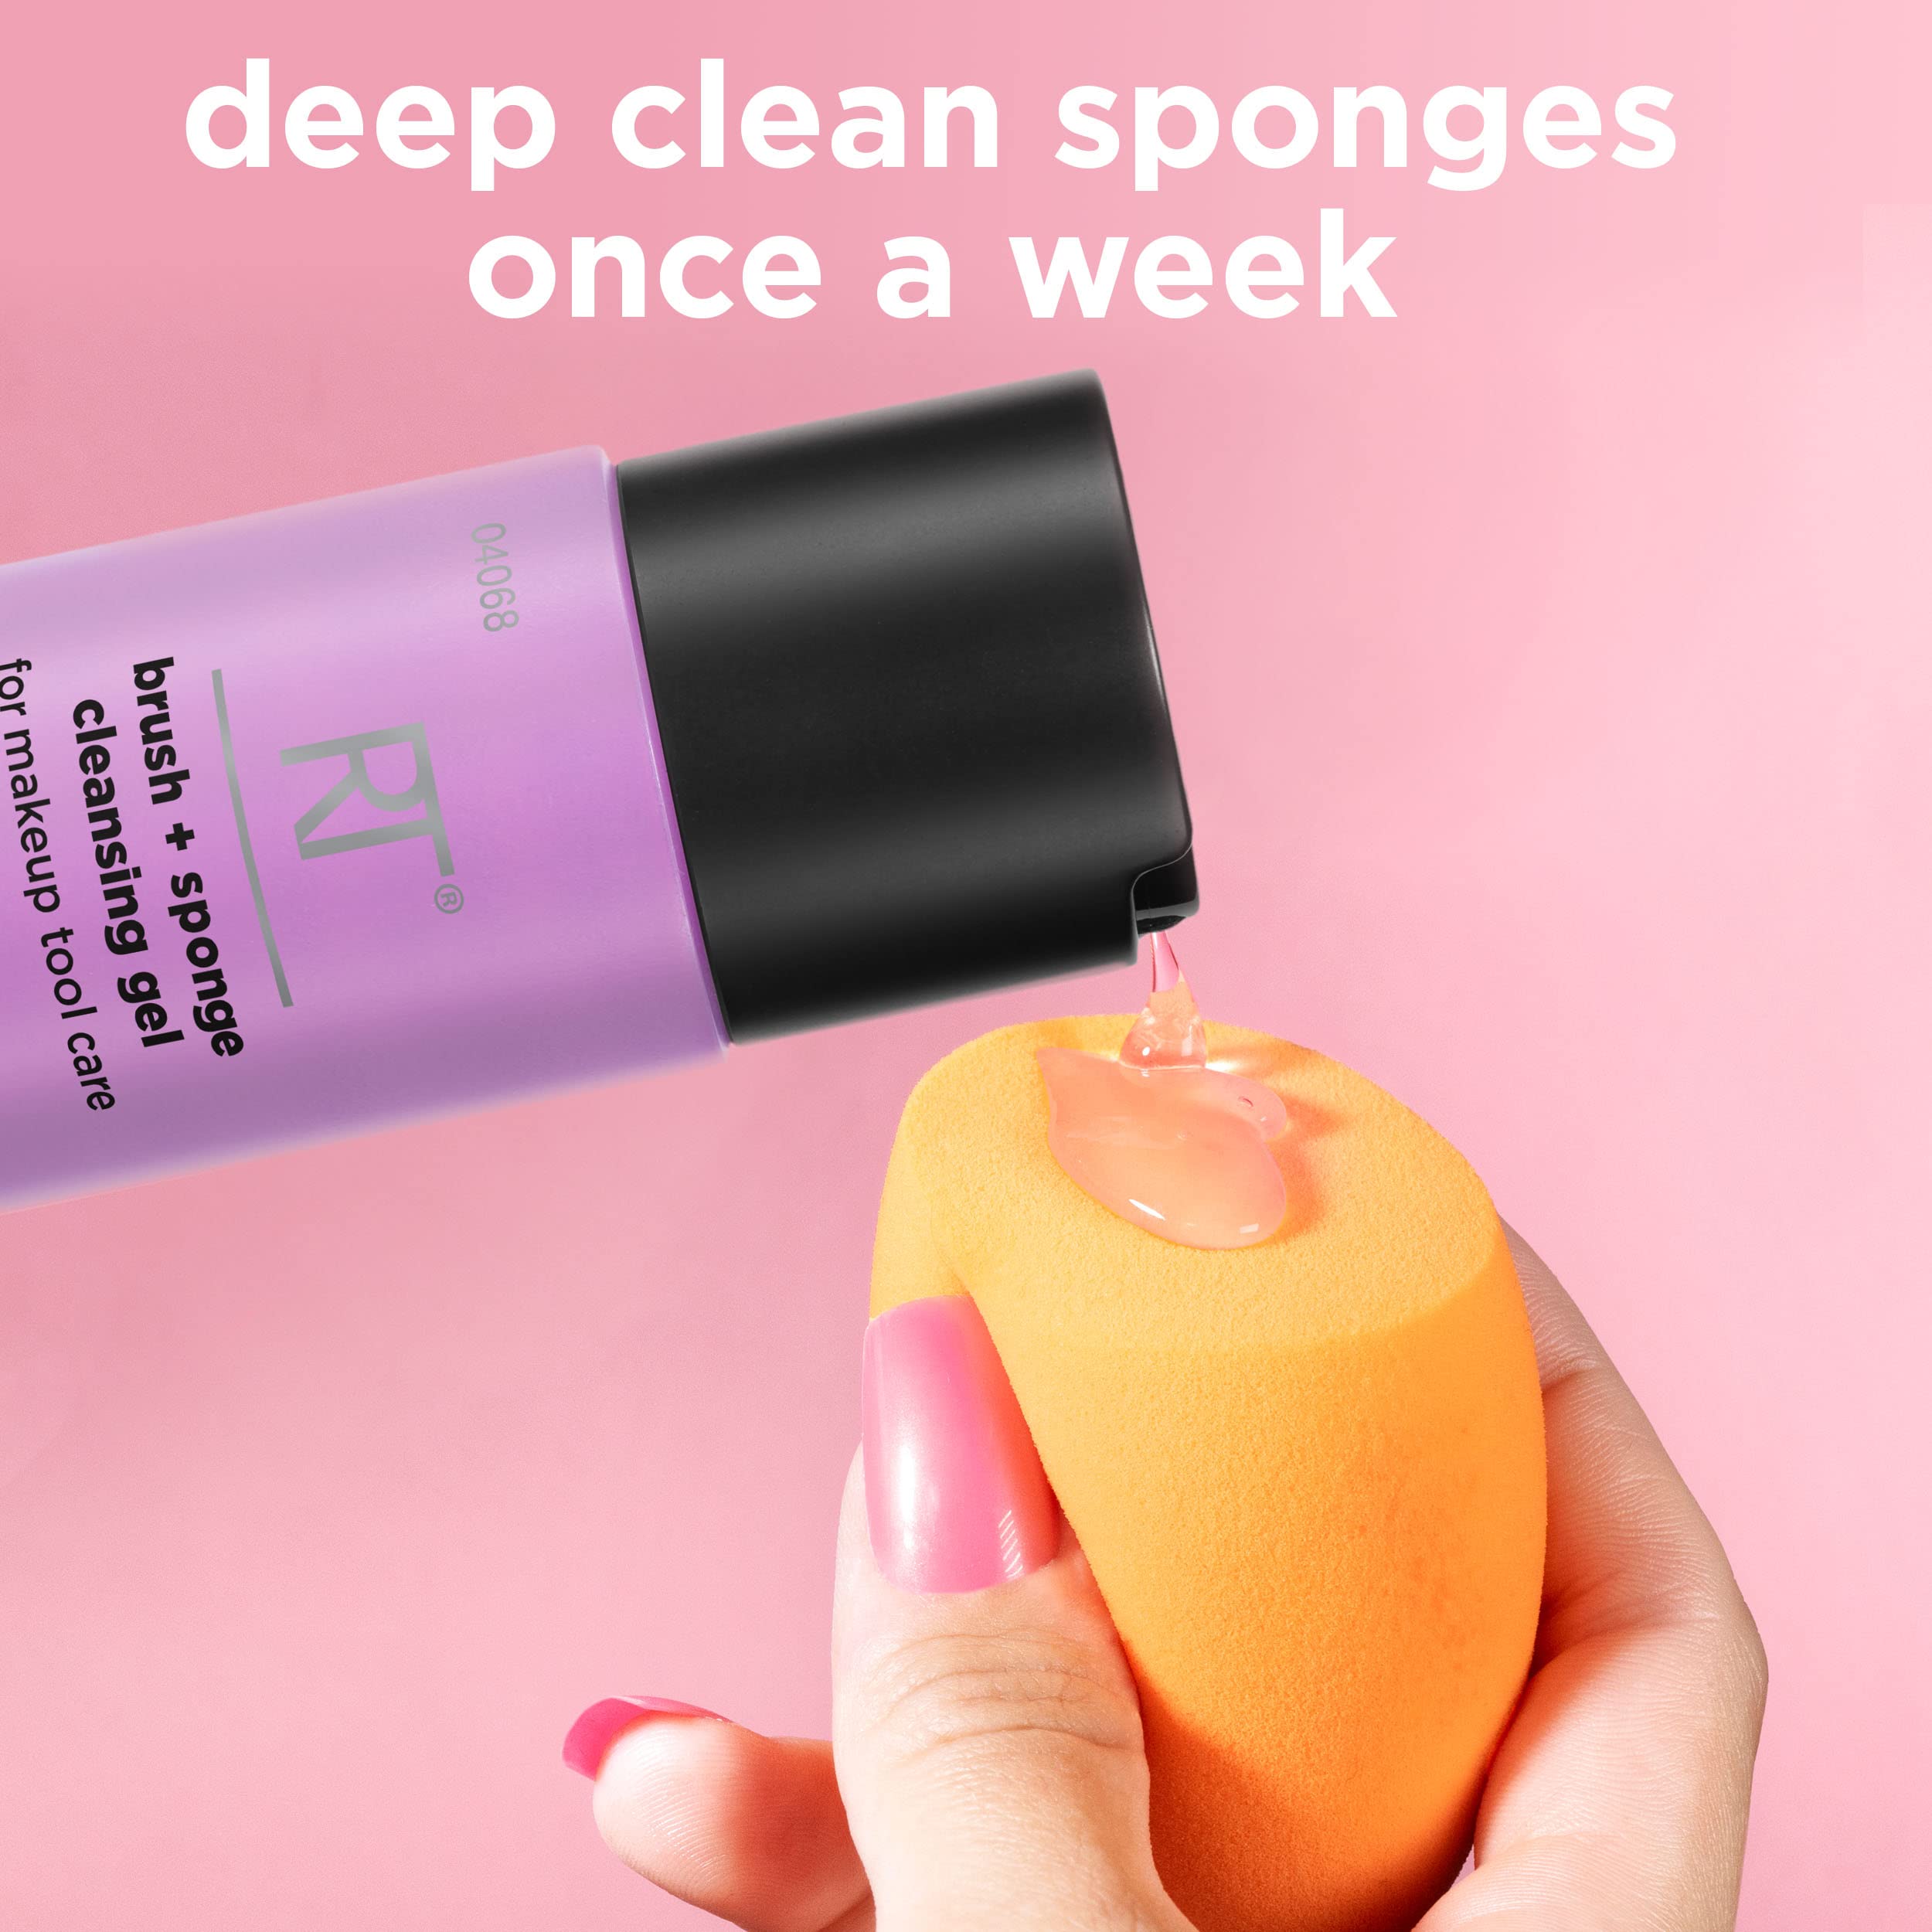 Real Techniques Makeup Brush and Blending Sponge Cleansing Gel, Professional Beauty Sponge Cleansing Gel, Quick & Mess Free, Removes Oil & Impurities, Purple, 1 Count, 4 Fl Oz